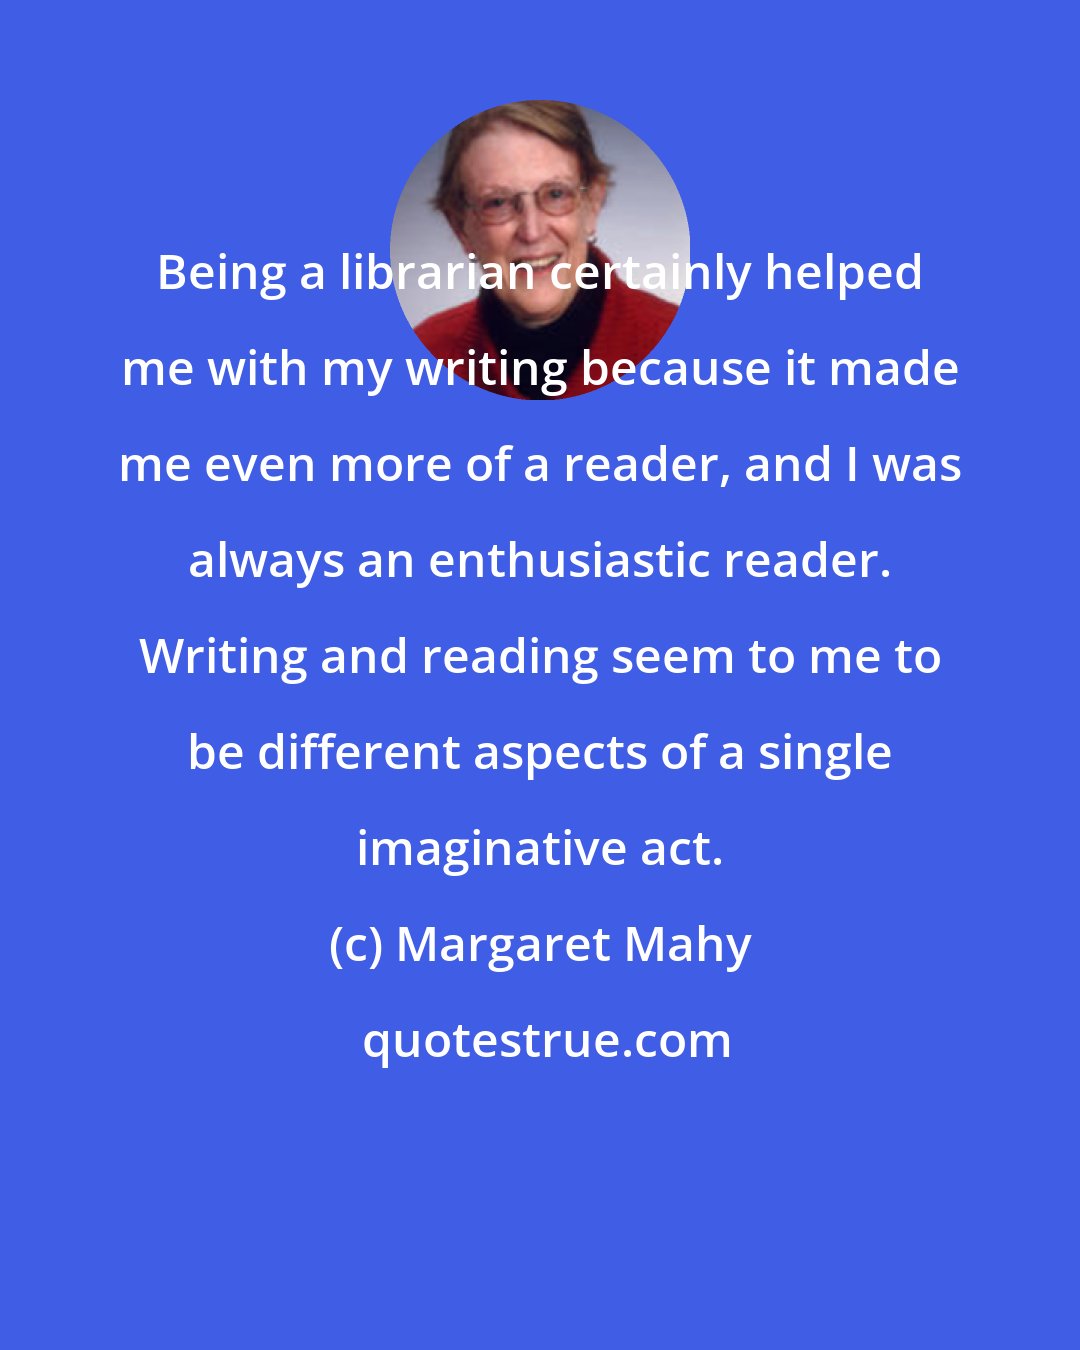 Margaret Mahy: Being a librarian certainly helped me with my writing because it made me even more of a reader, and I was always an enthusiastic reader. Writing and reading seem to me to be different aspects of a single imaginative act.